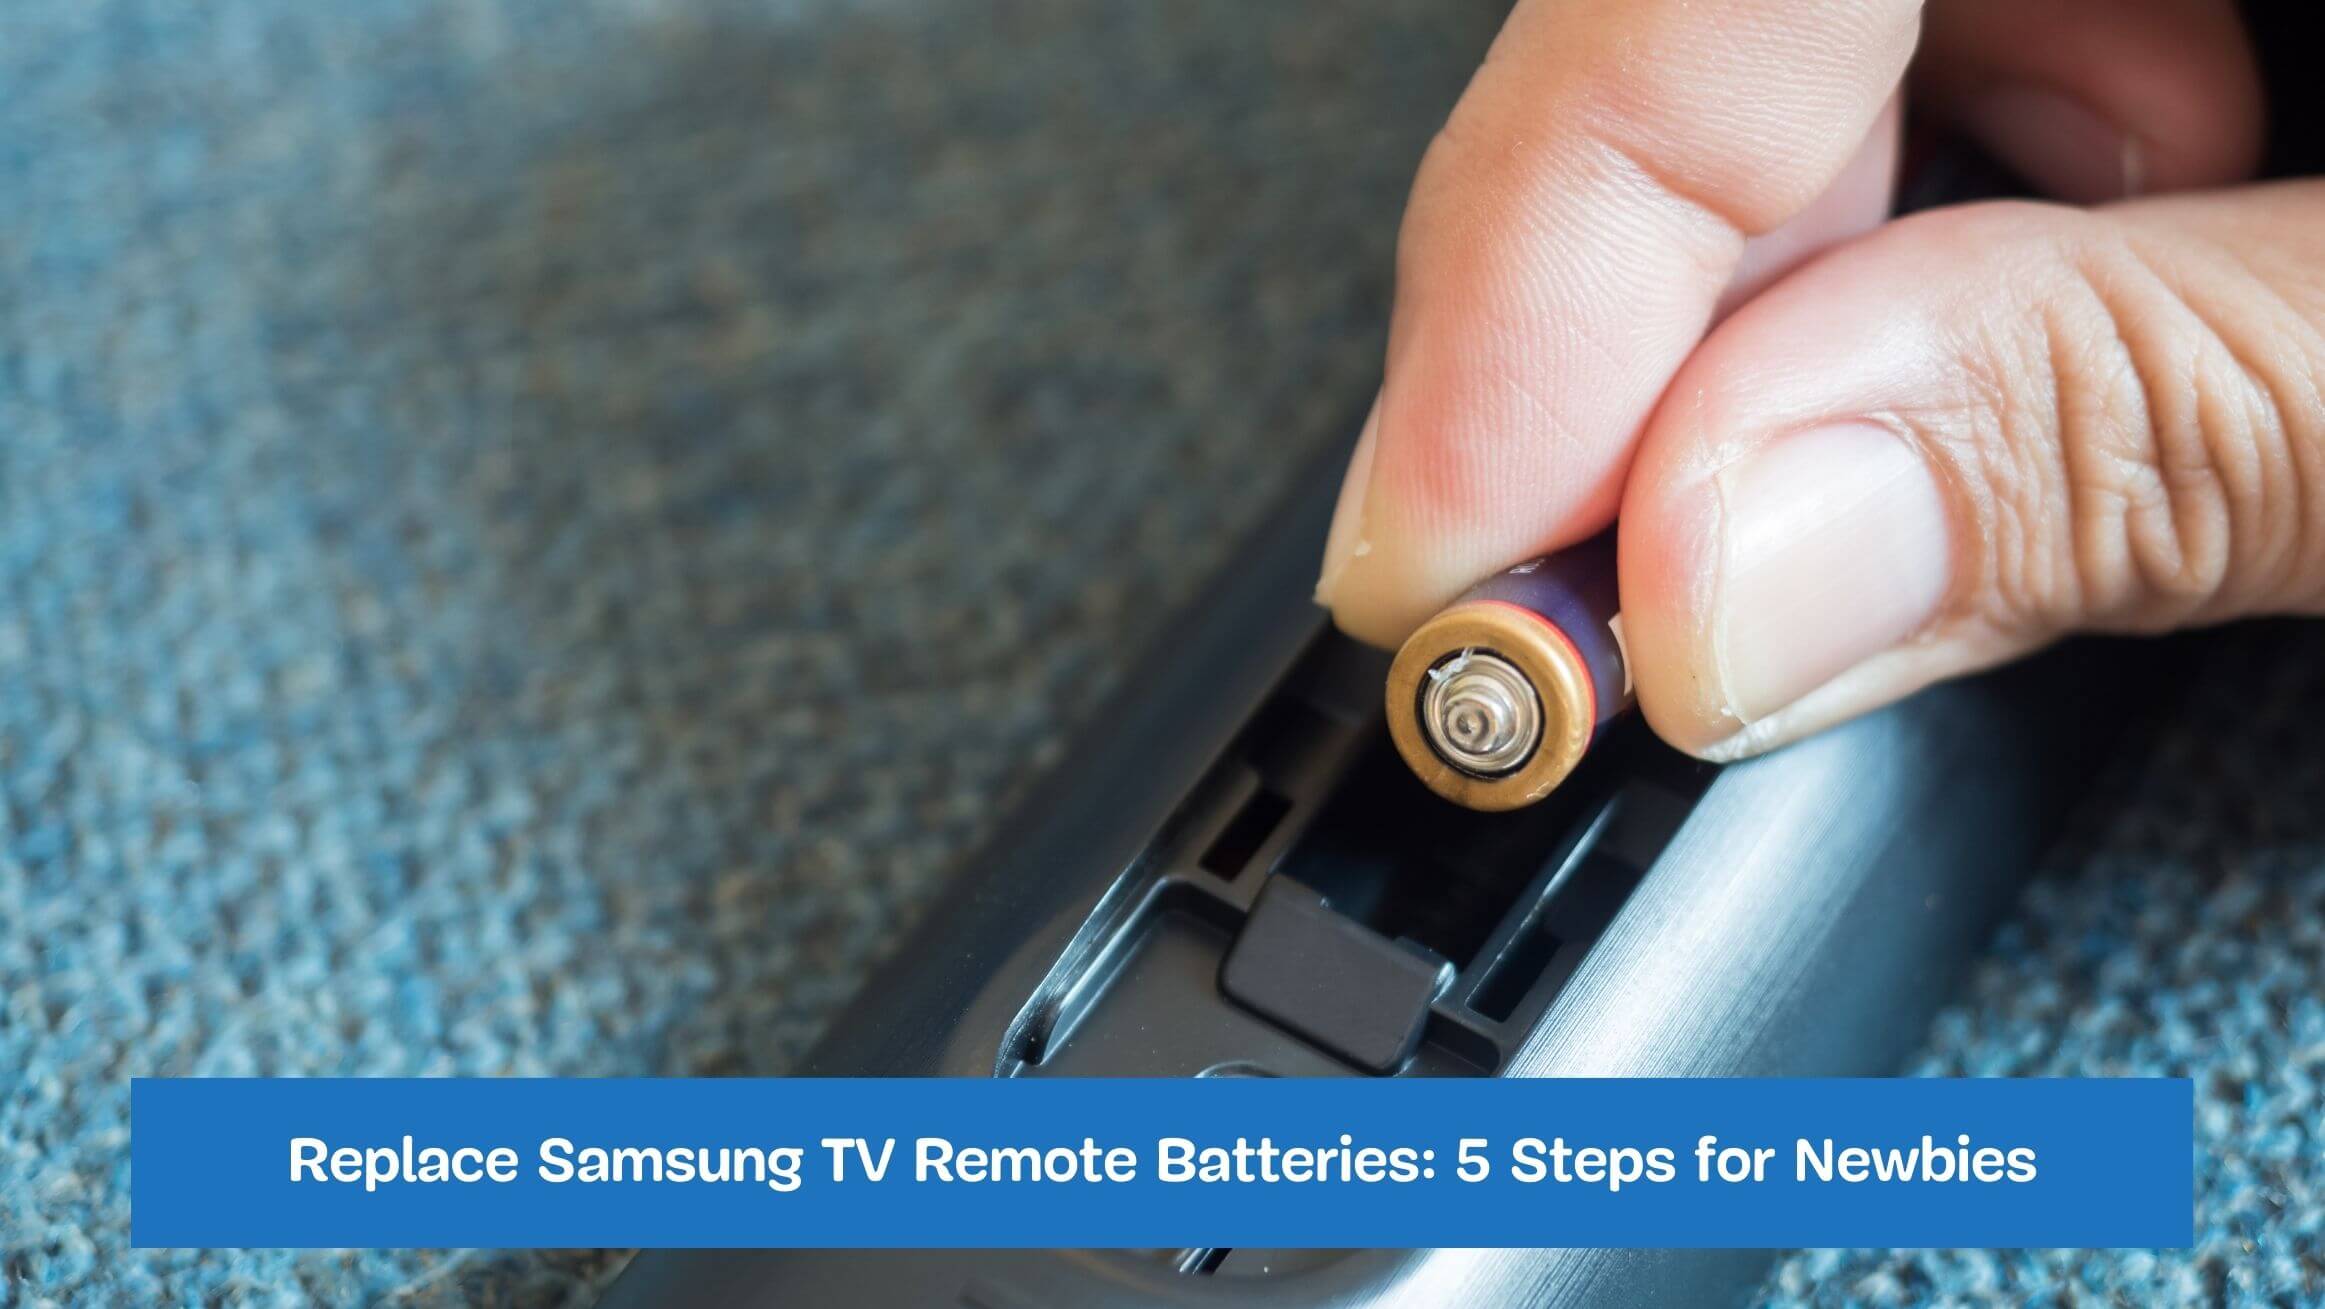 Replace Samsung TV Remote Batteries: 5 Steps for Newbies